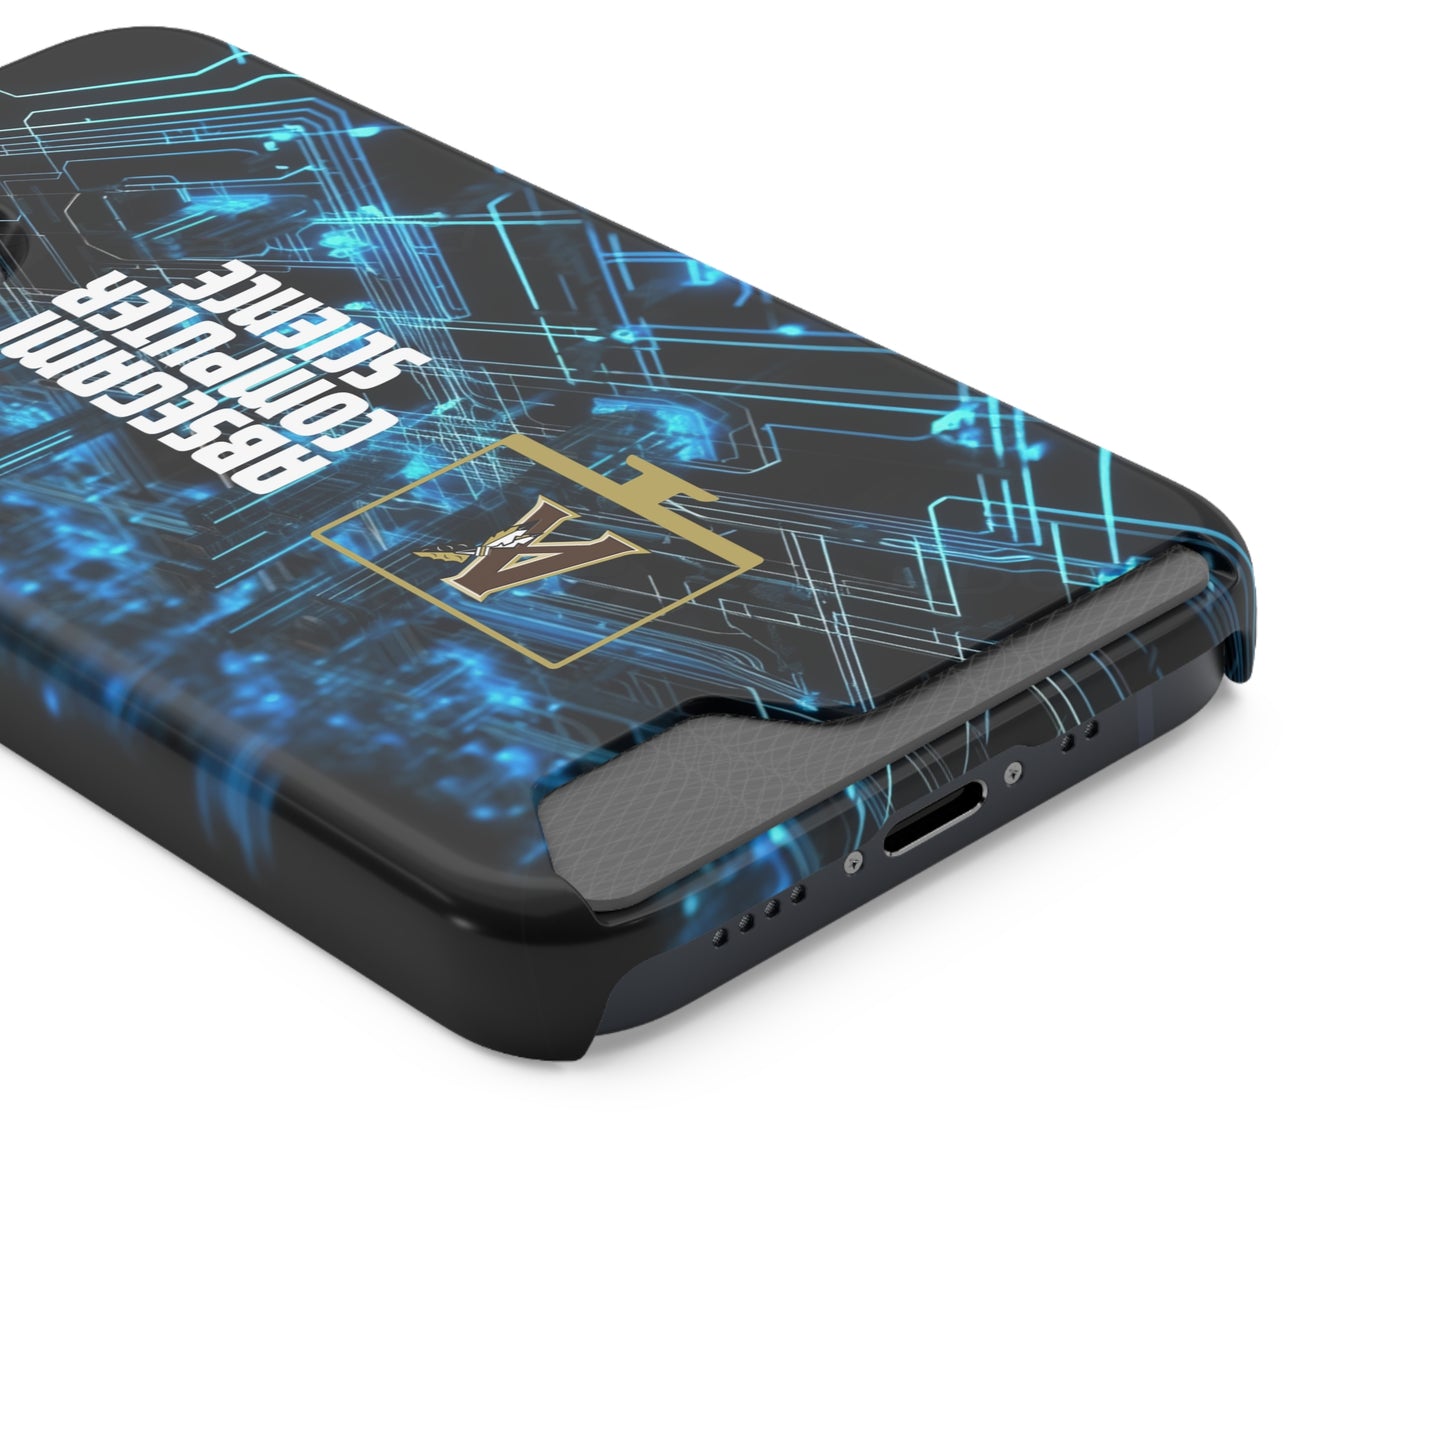 Absegami CompSci Phone Case With Card Holder